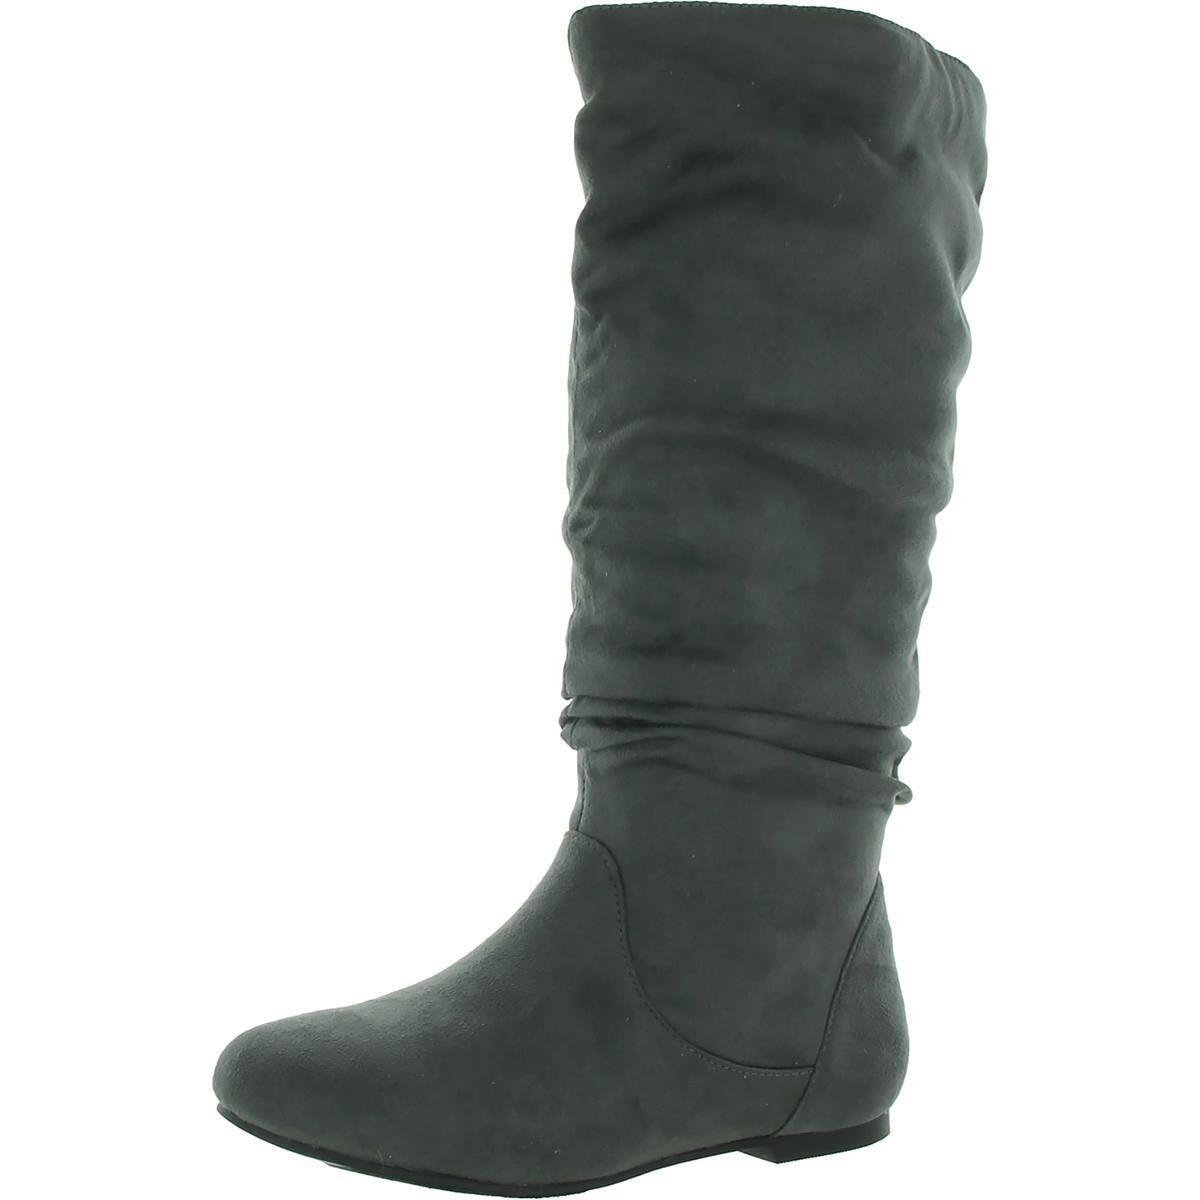 Gray Mid-Calf Boots Shoes